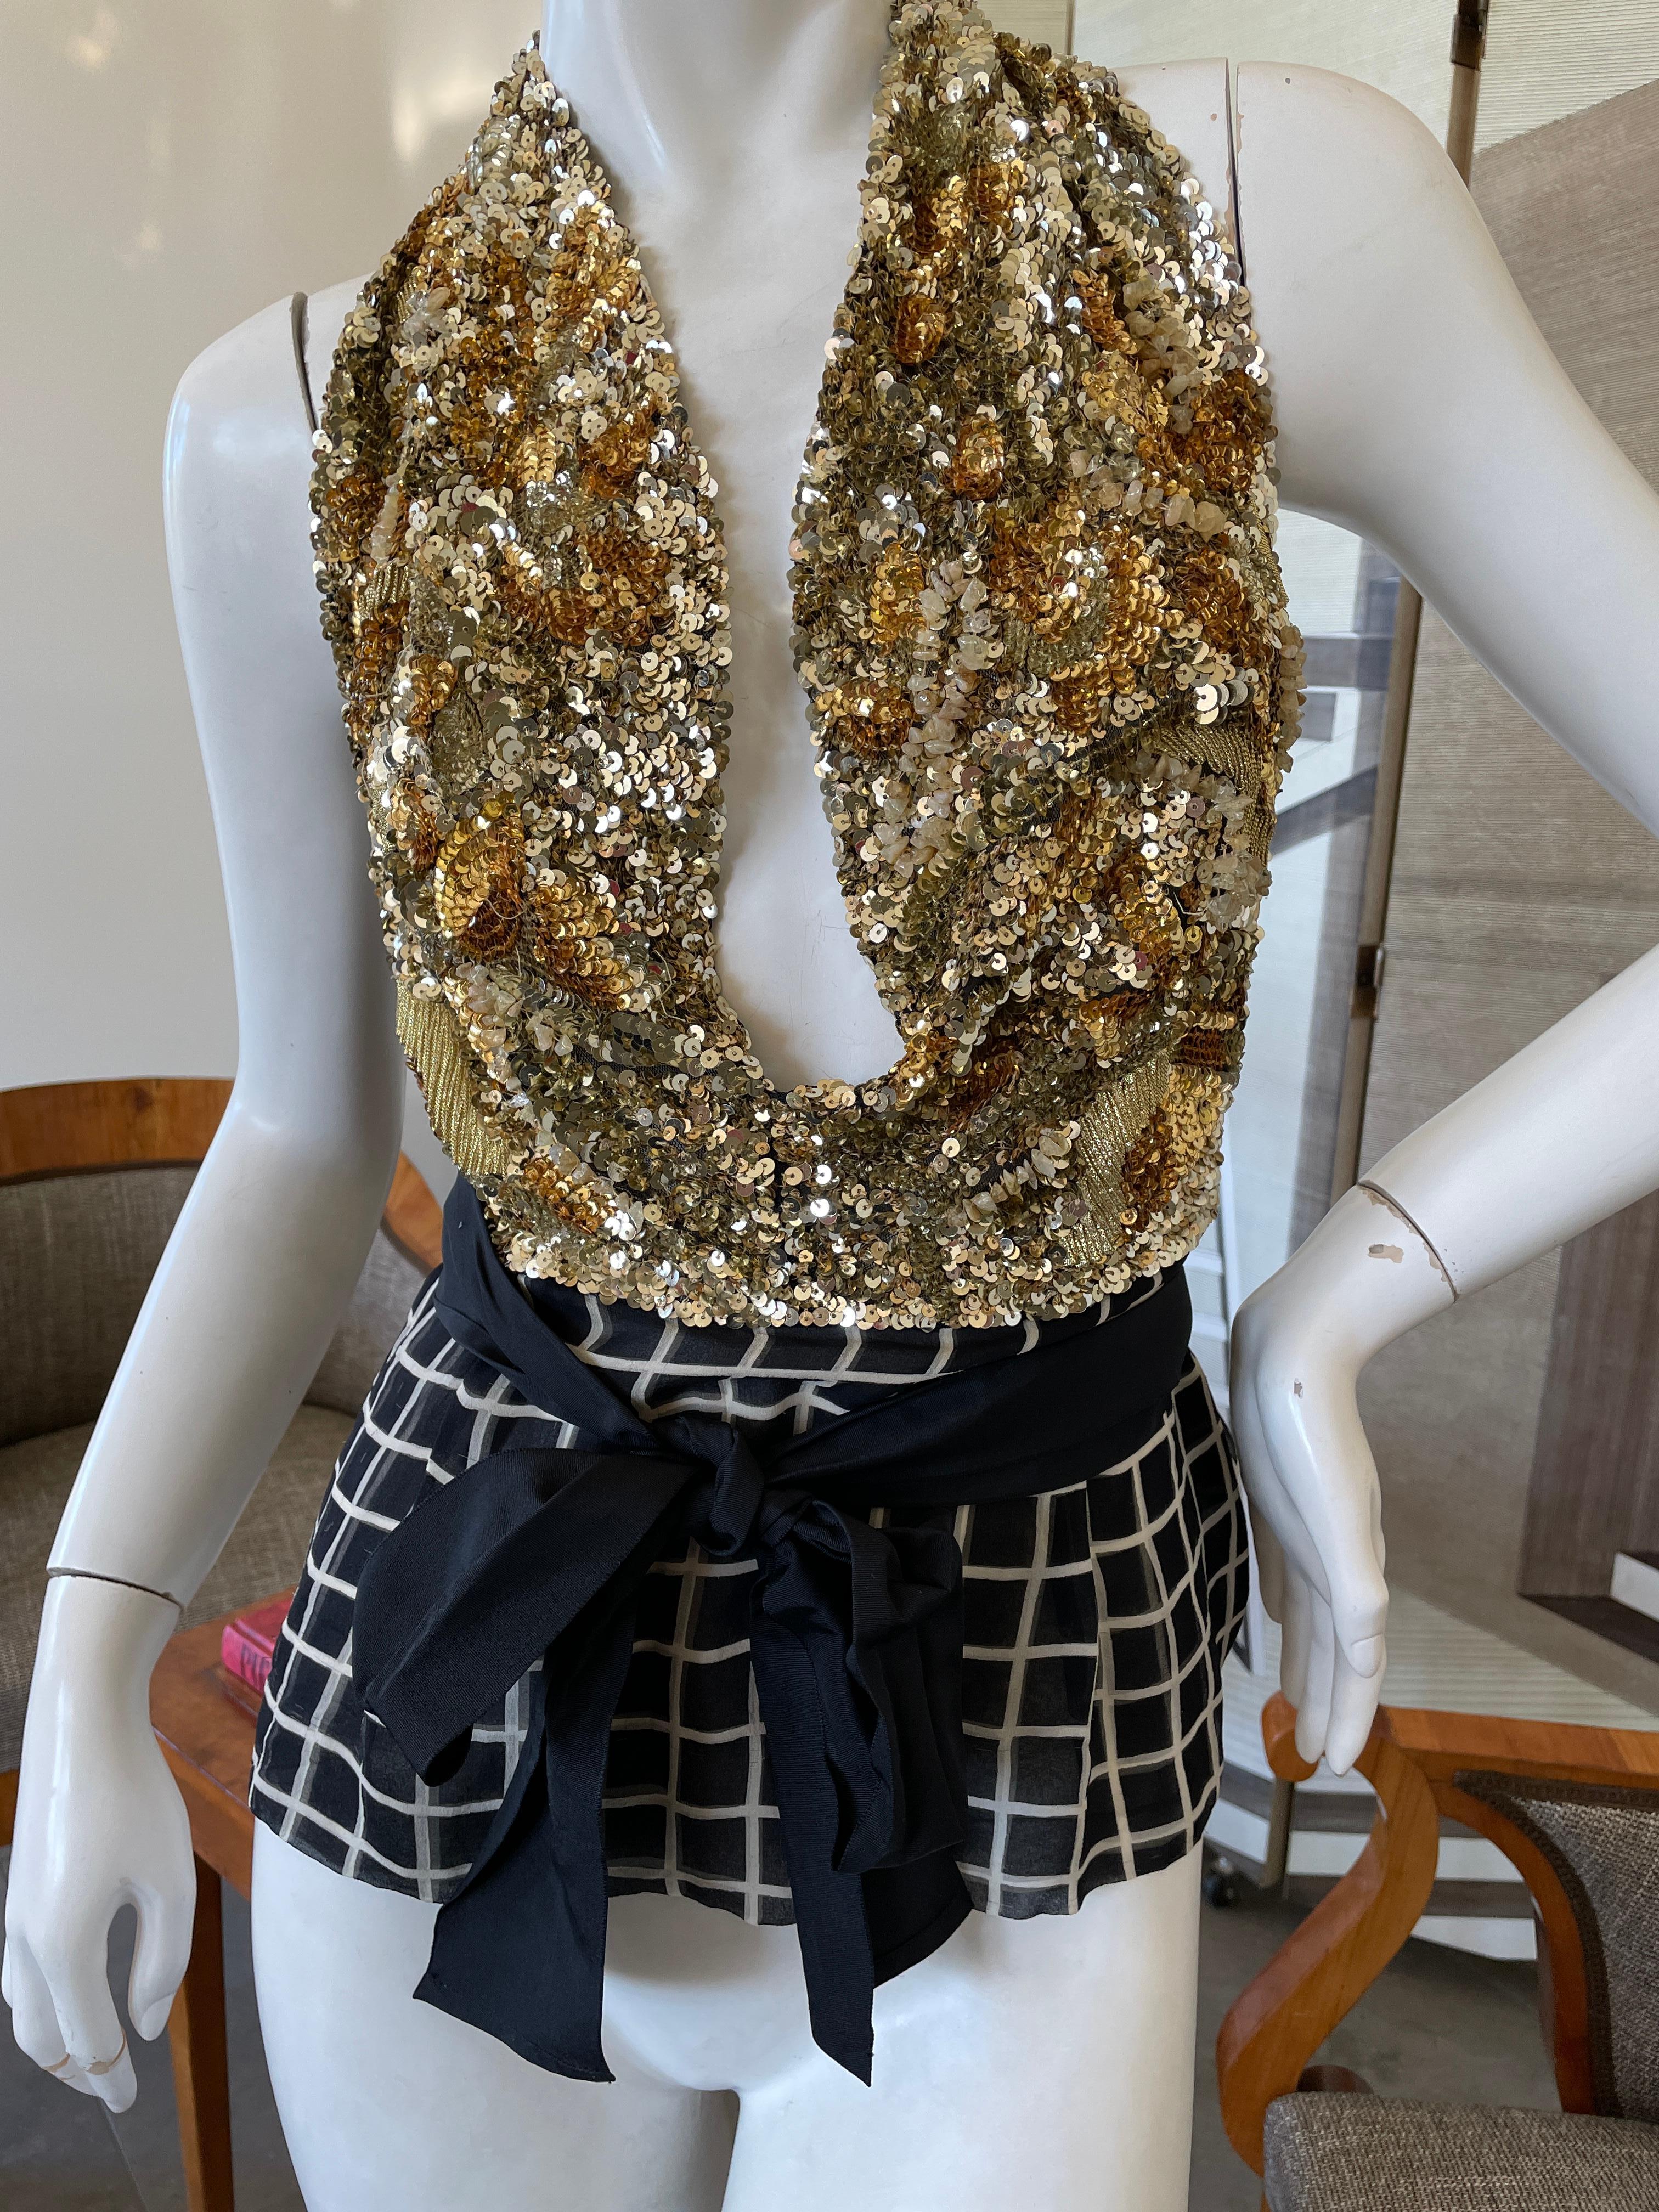 Dries van Noten Gold Embellished Low Cut SIlk Halter Top.
Please use the zoom feature to see all the incredible hand work , incredible.
Size 42
 Bust 38